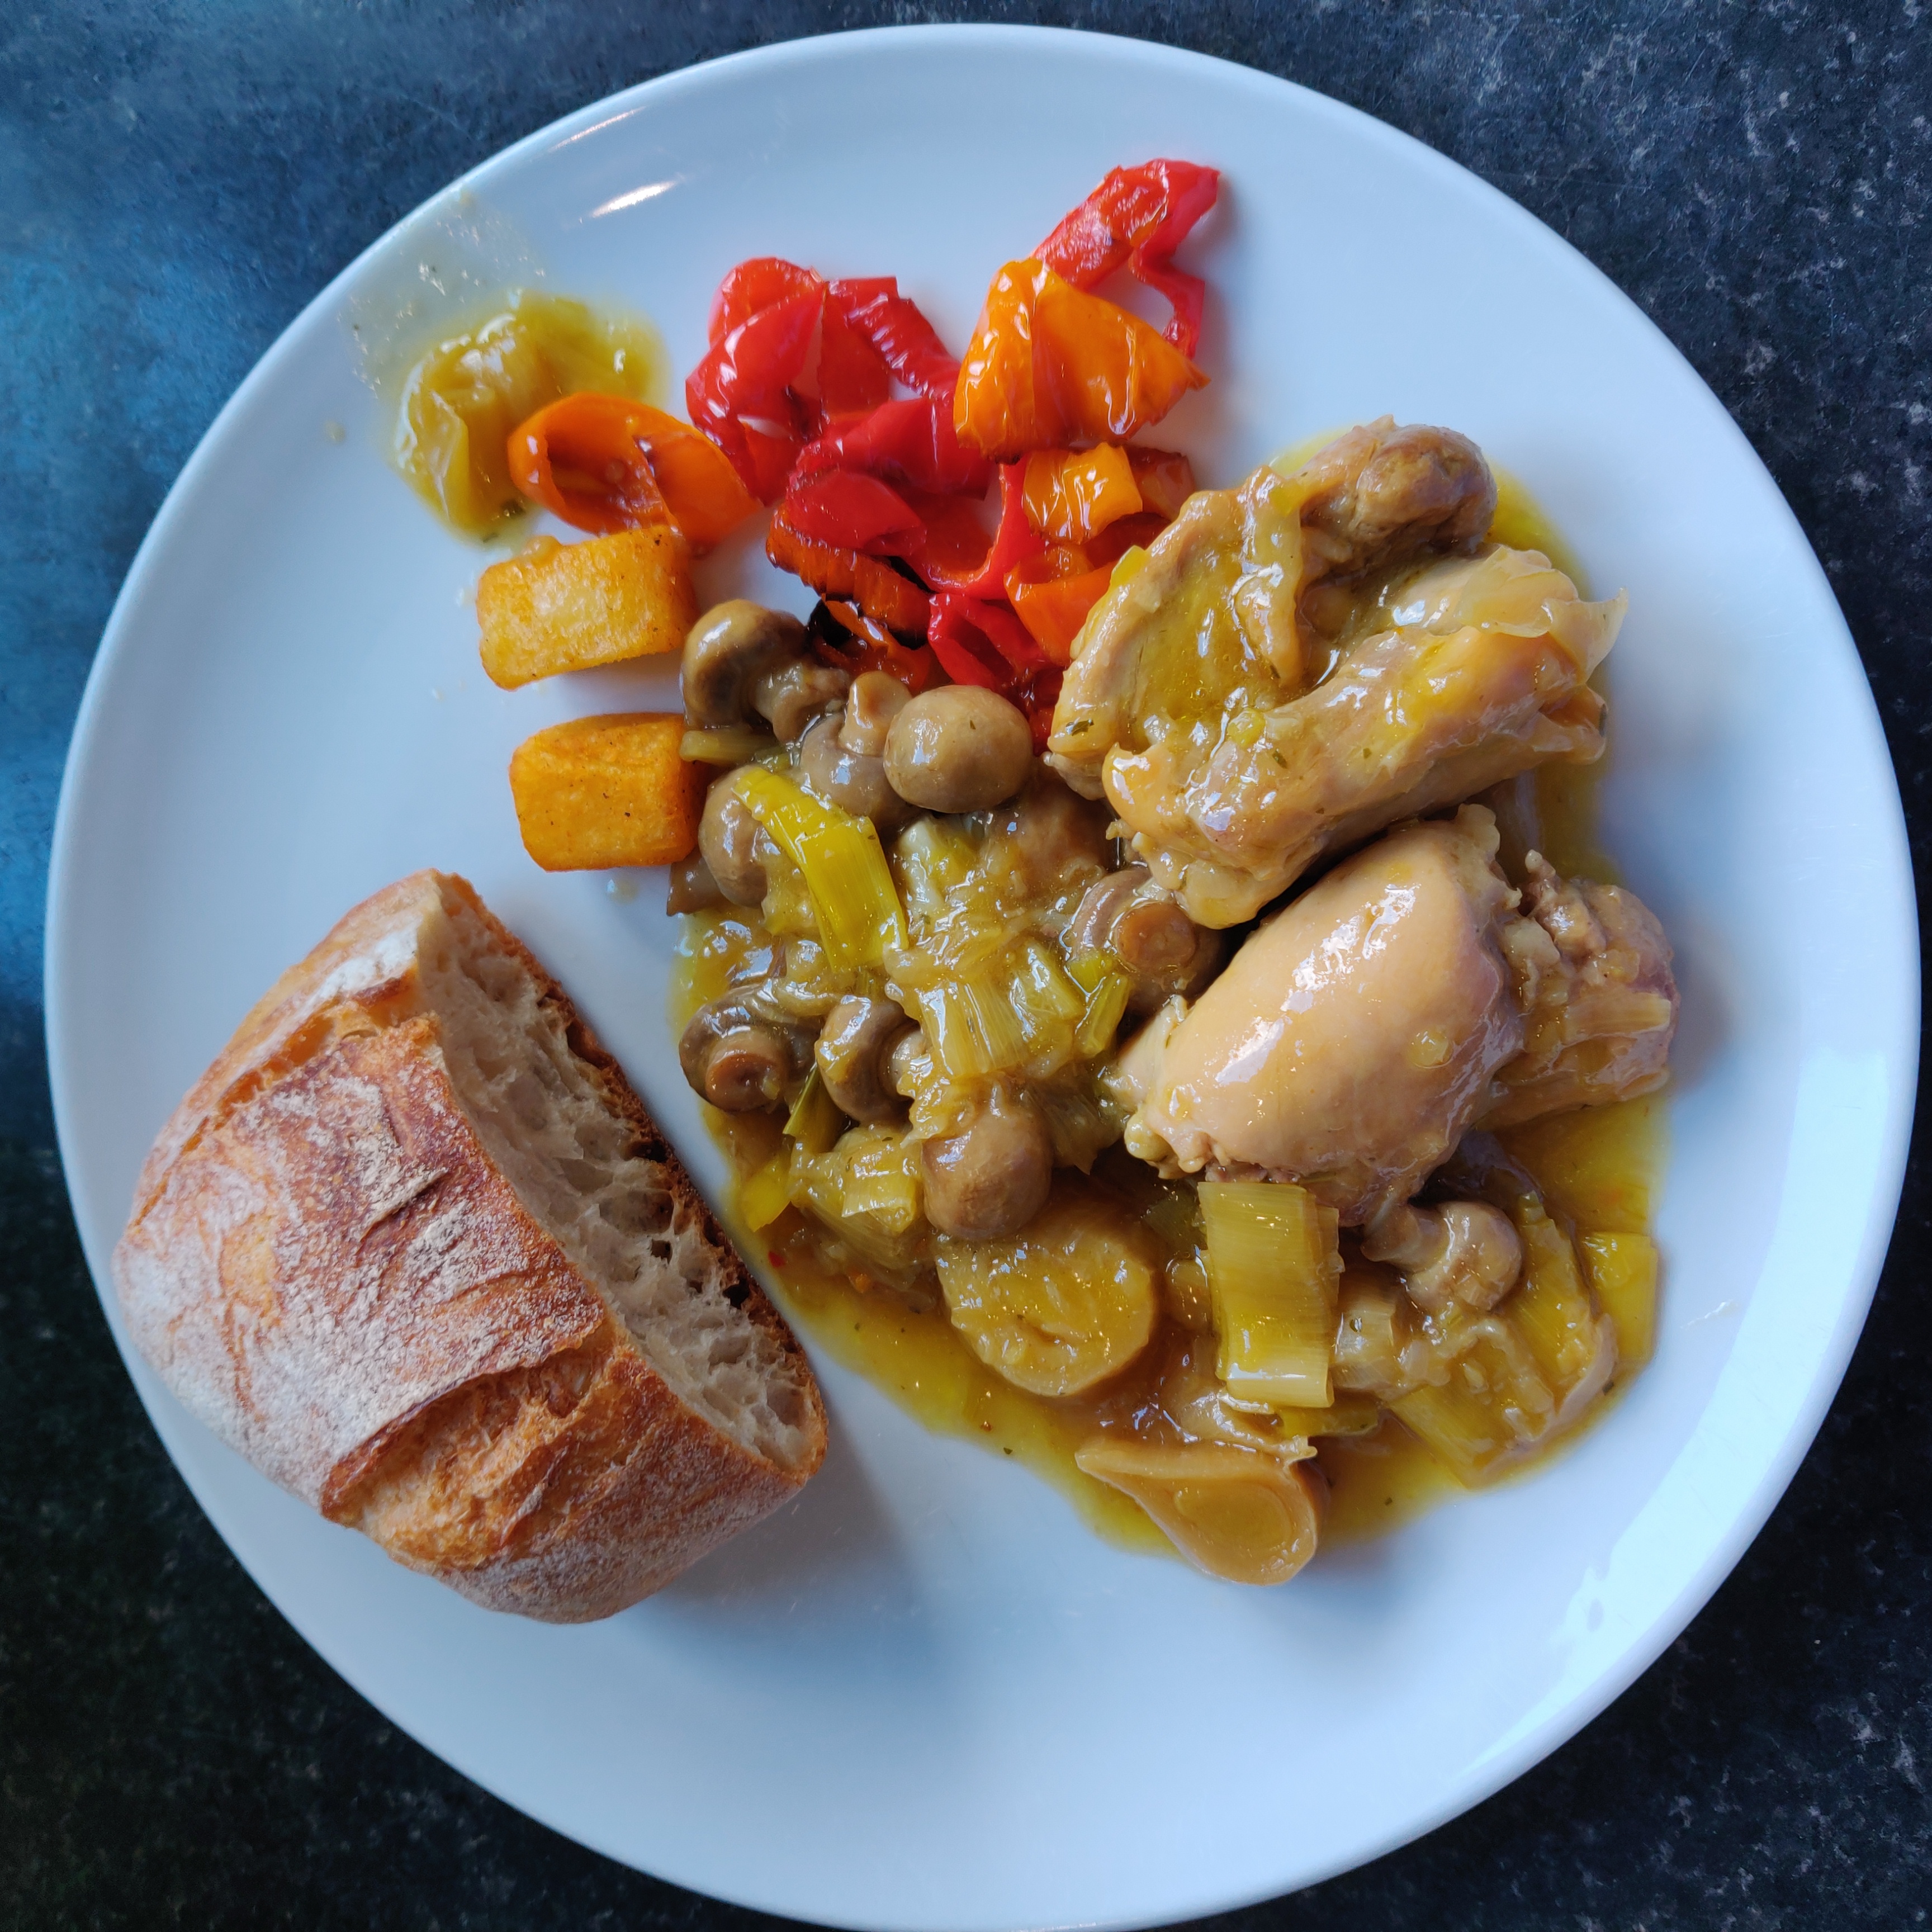 Chicken with leeks and mushrooms, served with fried peppers and crusty bread